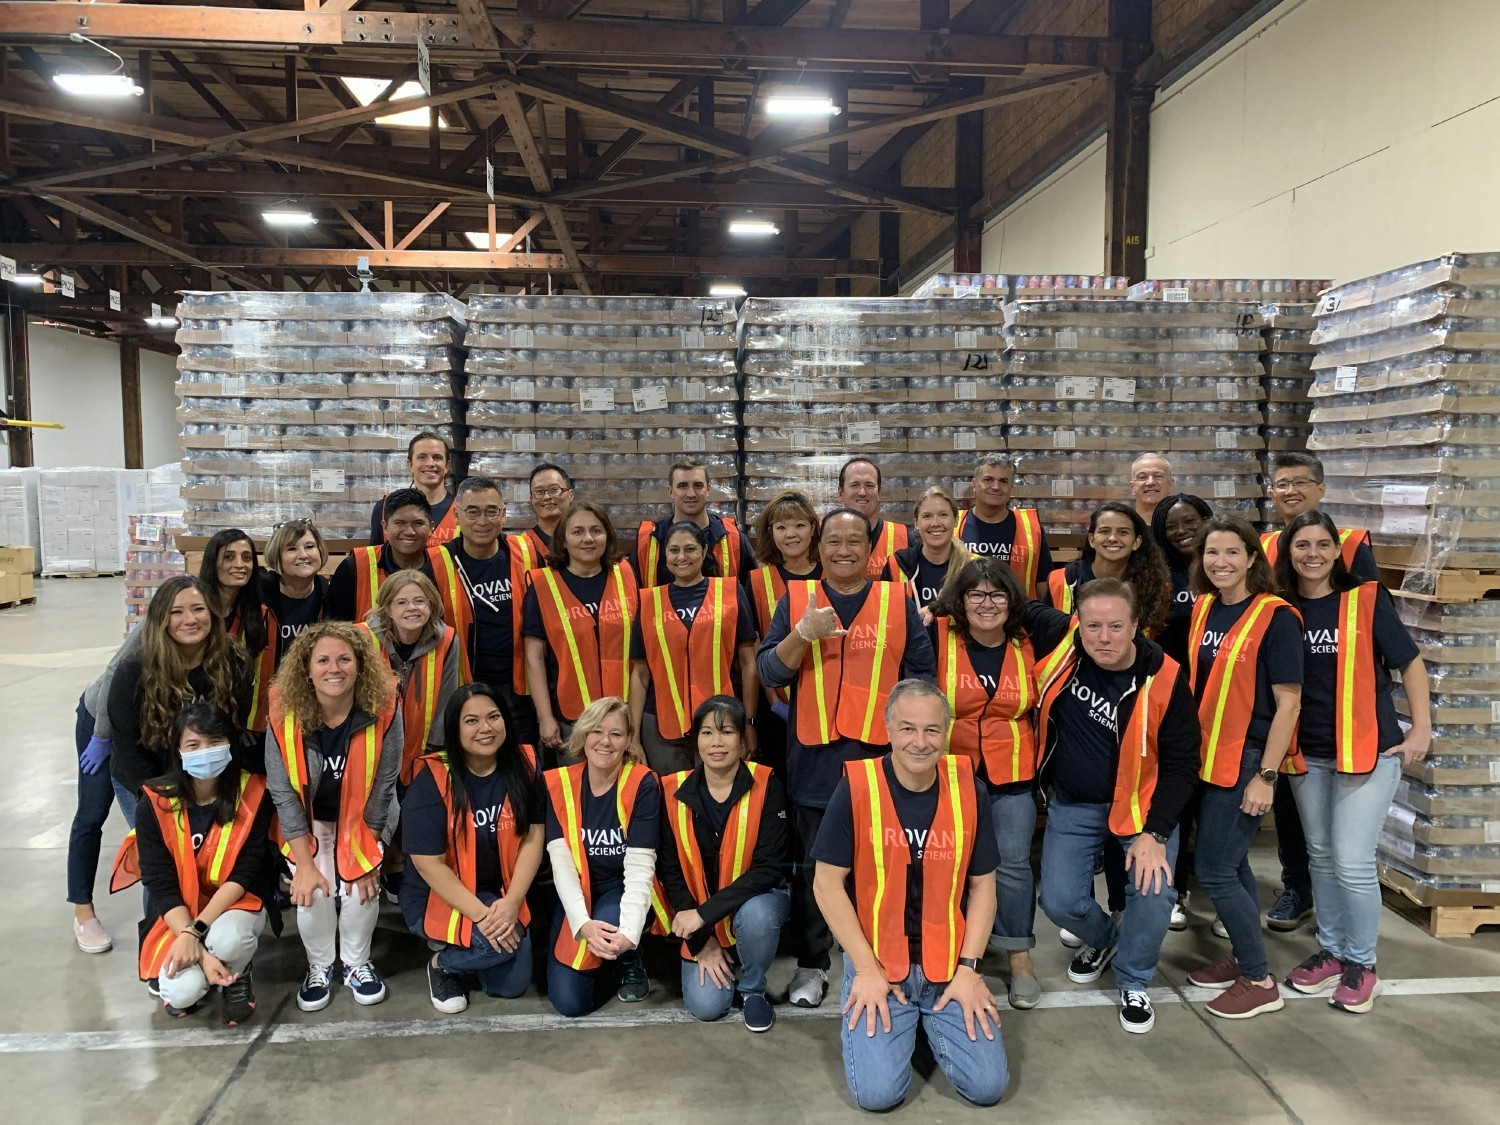 Our employees volunteered at a local food bank sorting and packaging food items for families at risk of hunger.